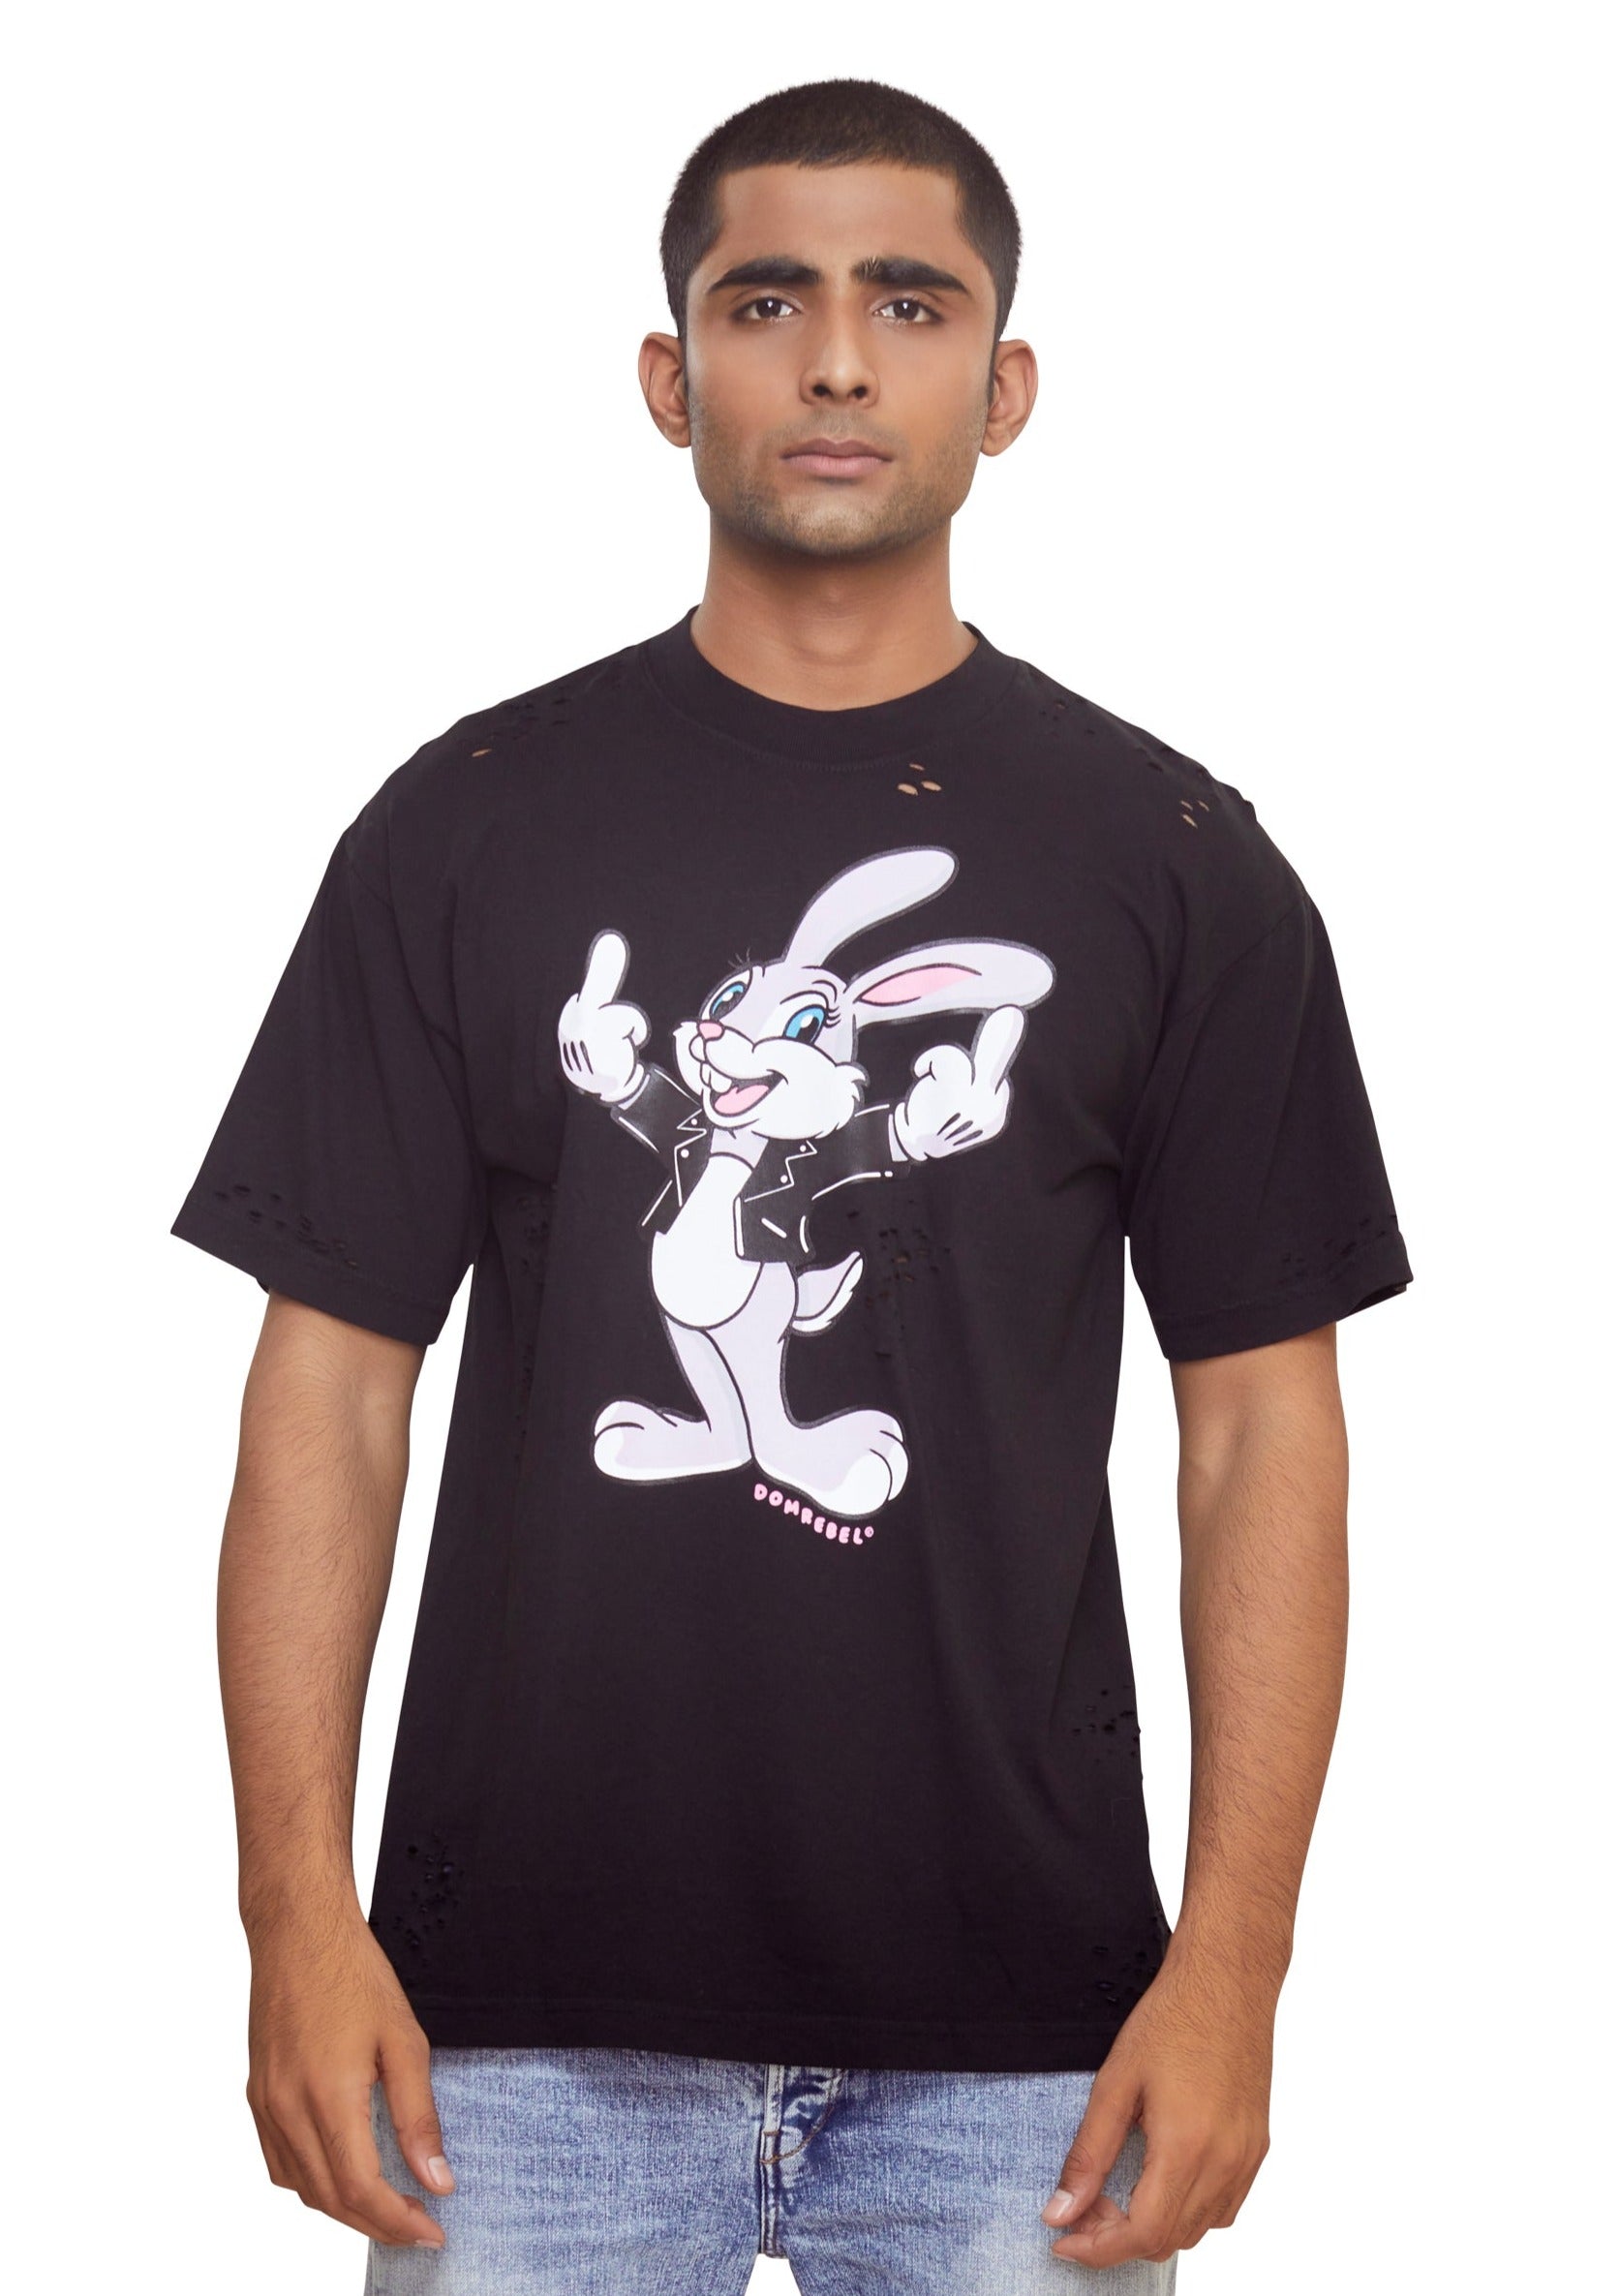 Black Rabbit graphic-print distressed cotton T-shirt from the brand Domrebel